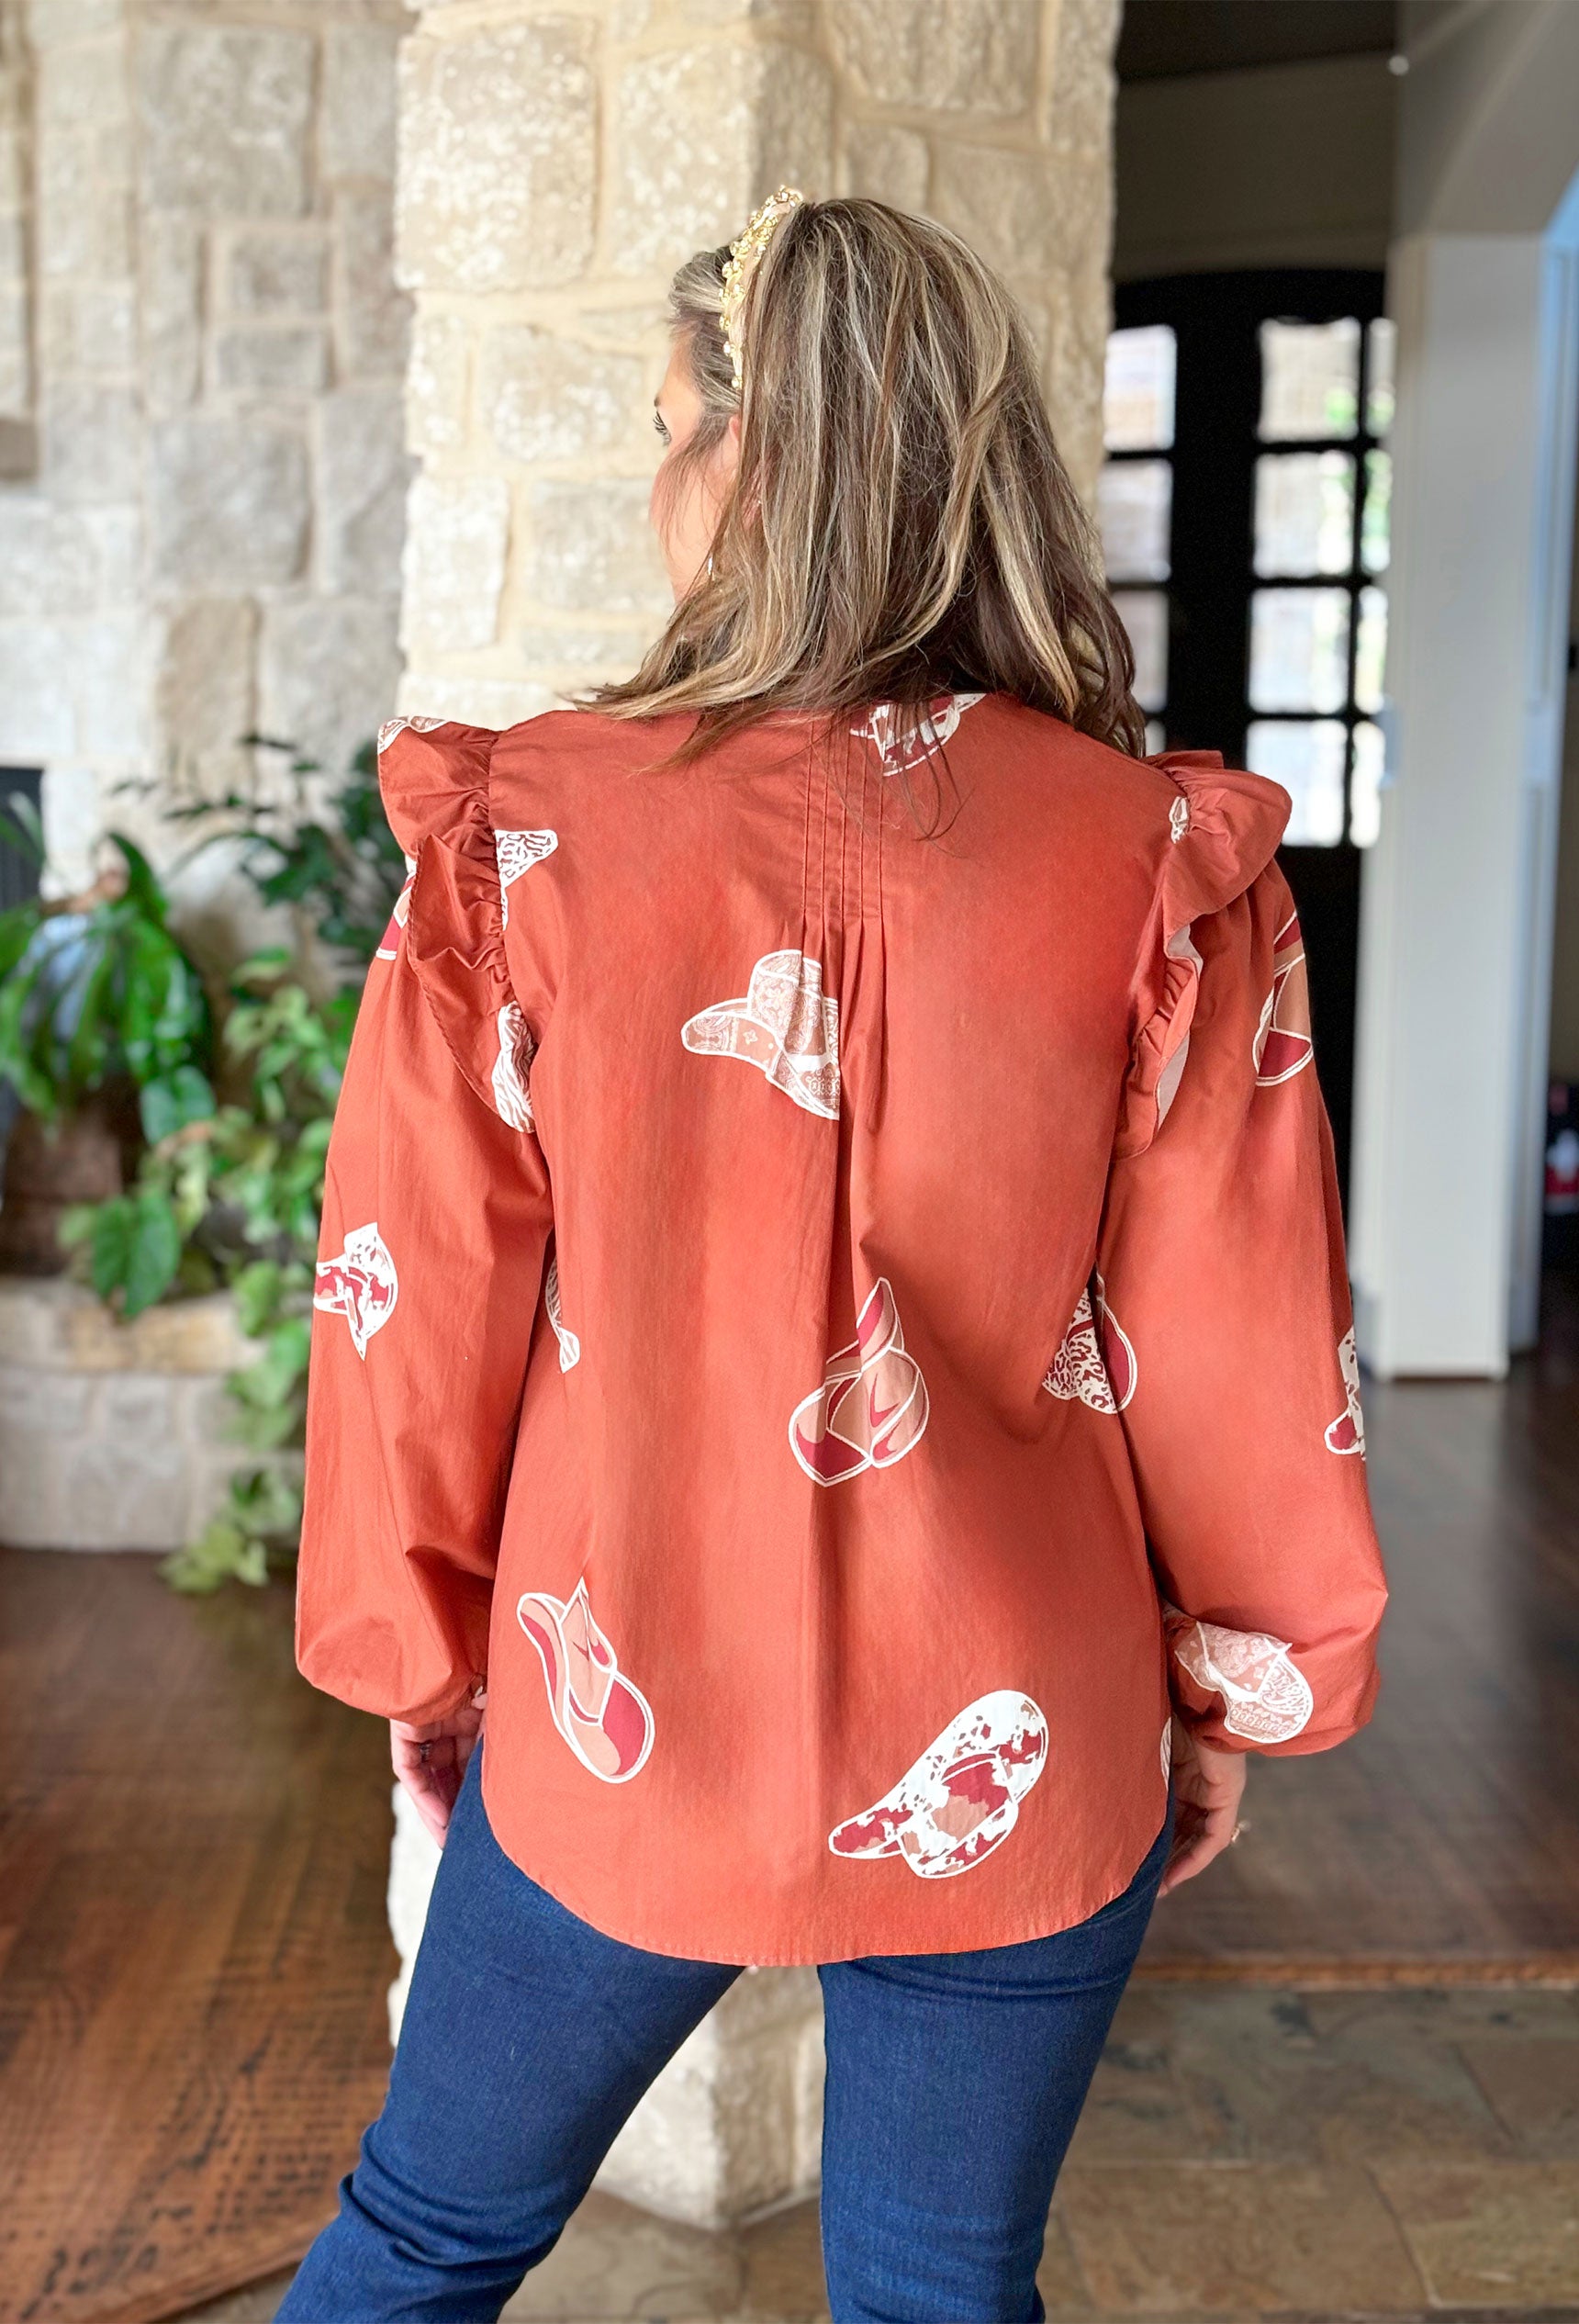 Cowboy Take Me Away Blouse, burnt orange blouse with ruffling across the chest and graphic cowboy hats all over the blouse